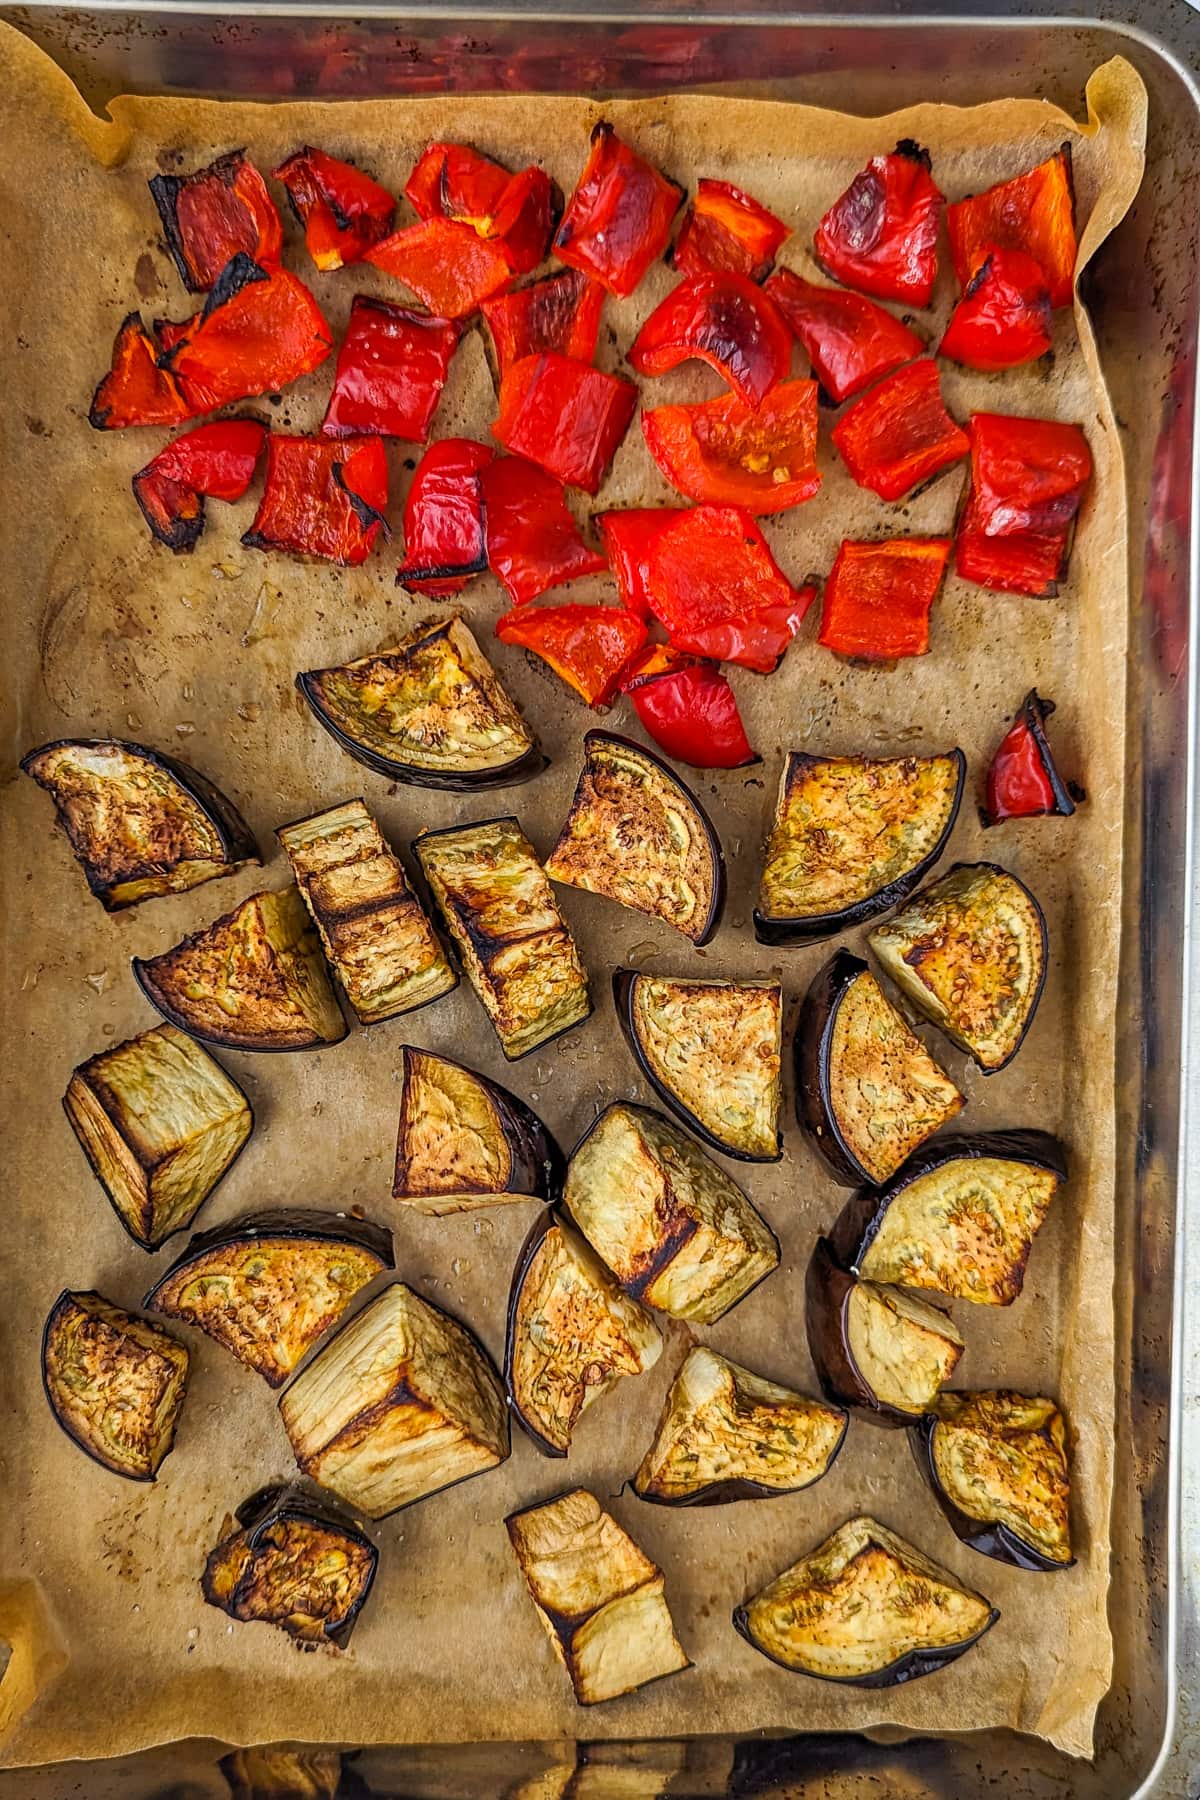 Top view of a baking traybake with roasted eggplants and bell peppers.